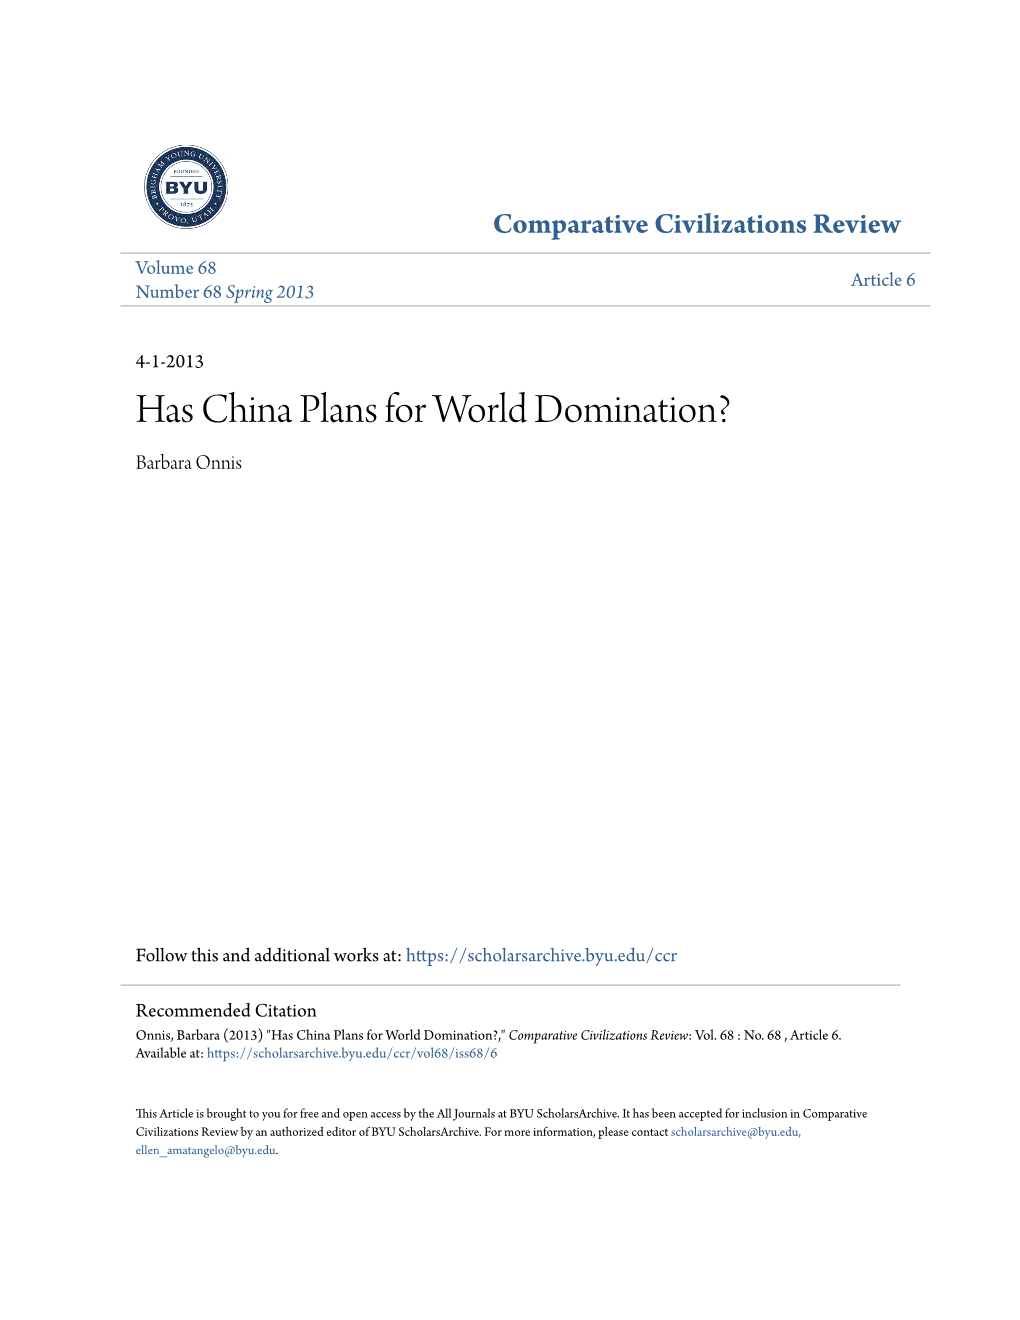 Has China Plans for World Domination? Barbara Onnis